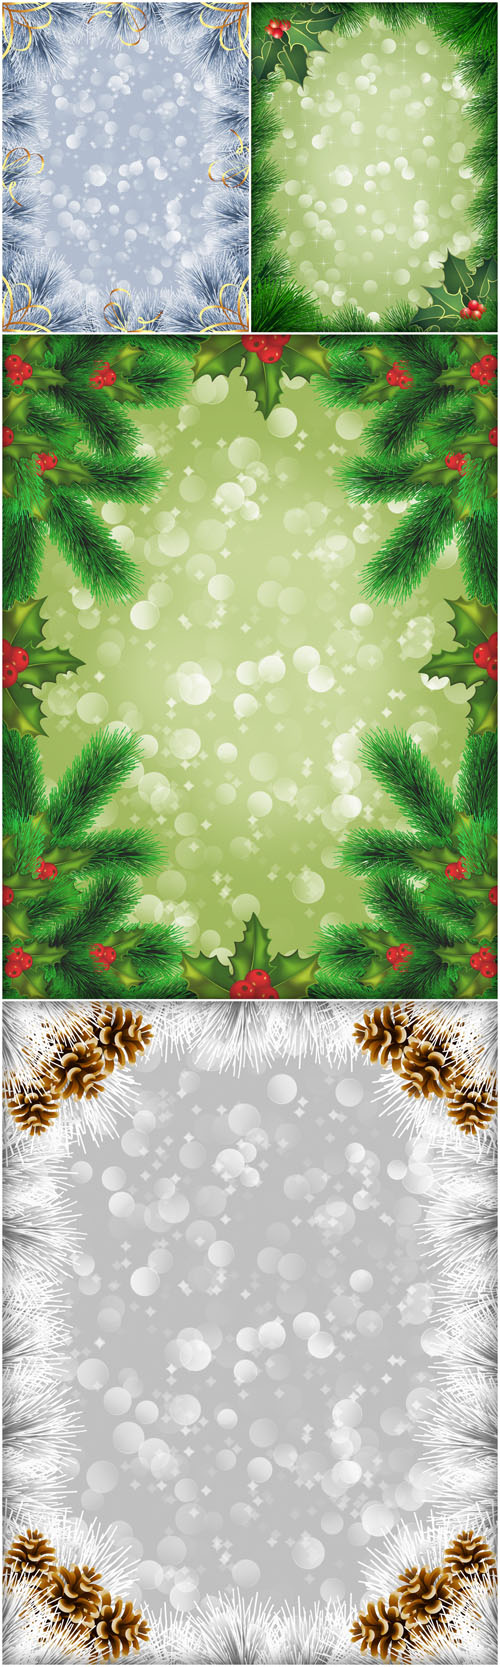 New Year backgrounds with frames New!